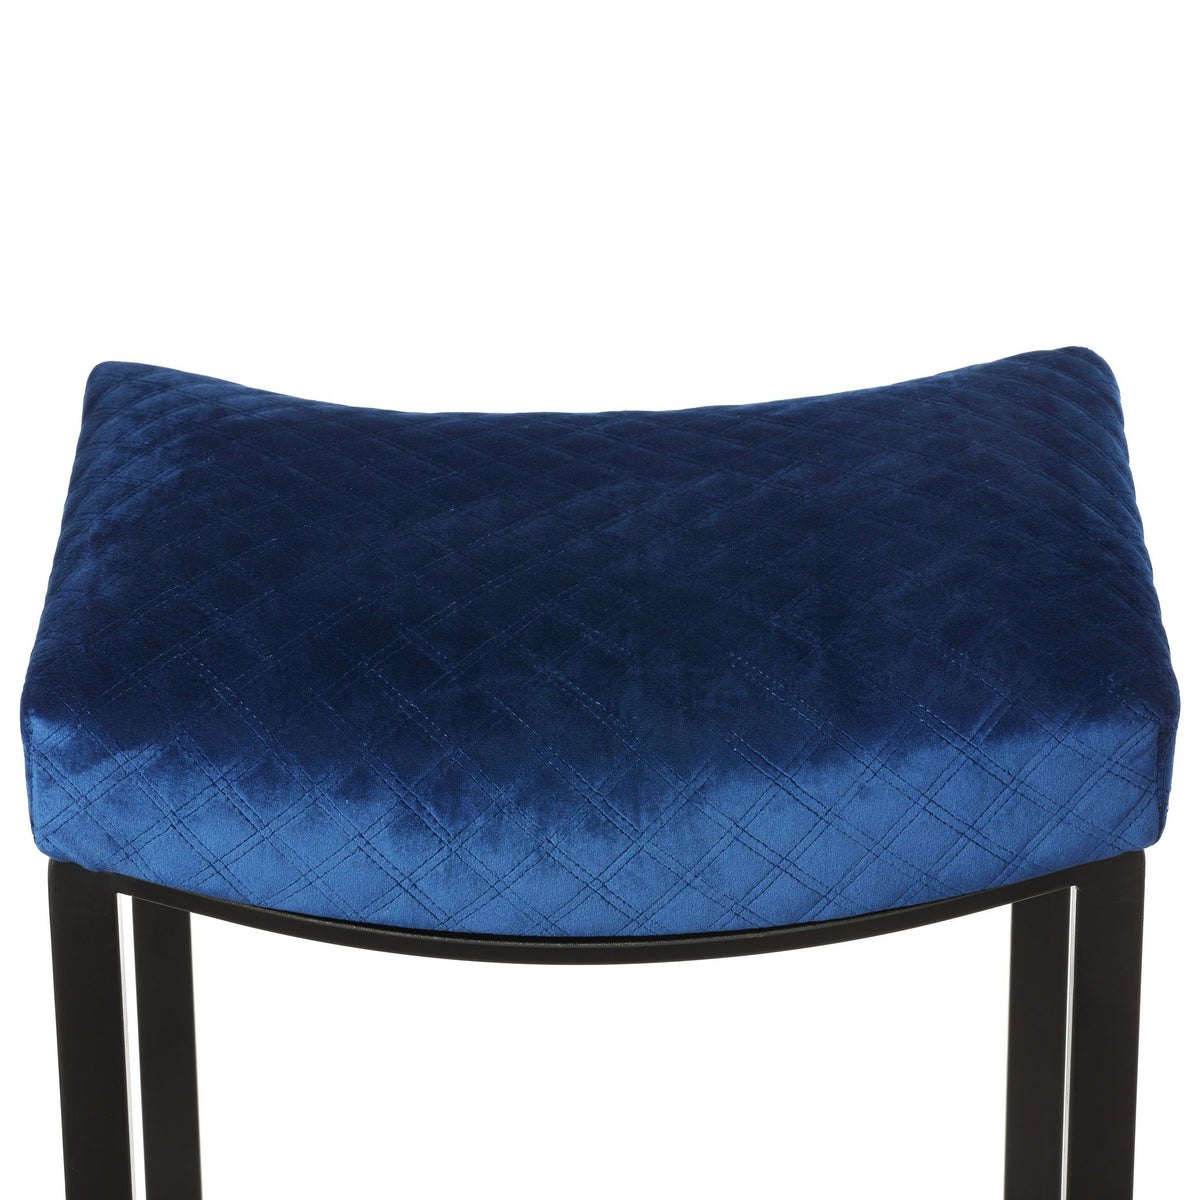 Cortesi Home Portales Counterstool, Brushed Black Legs and Navy Blue Fabric